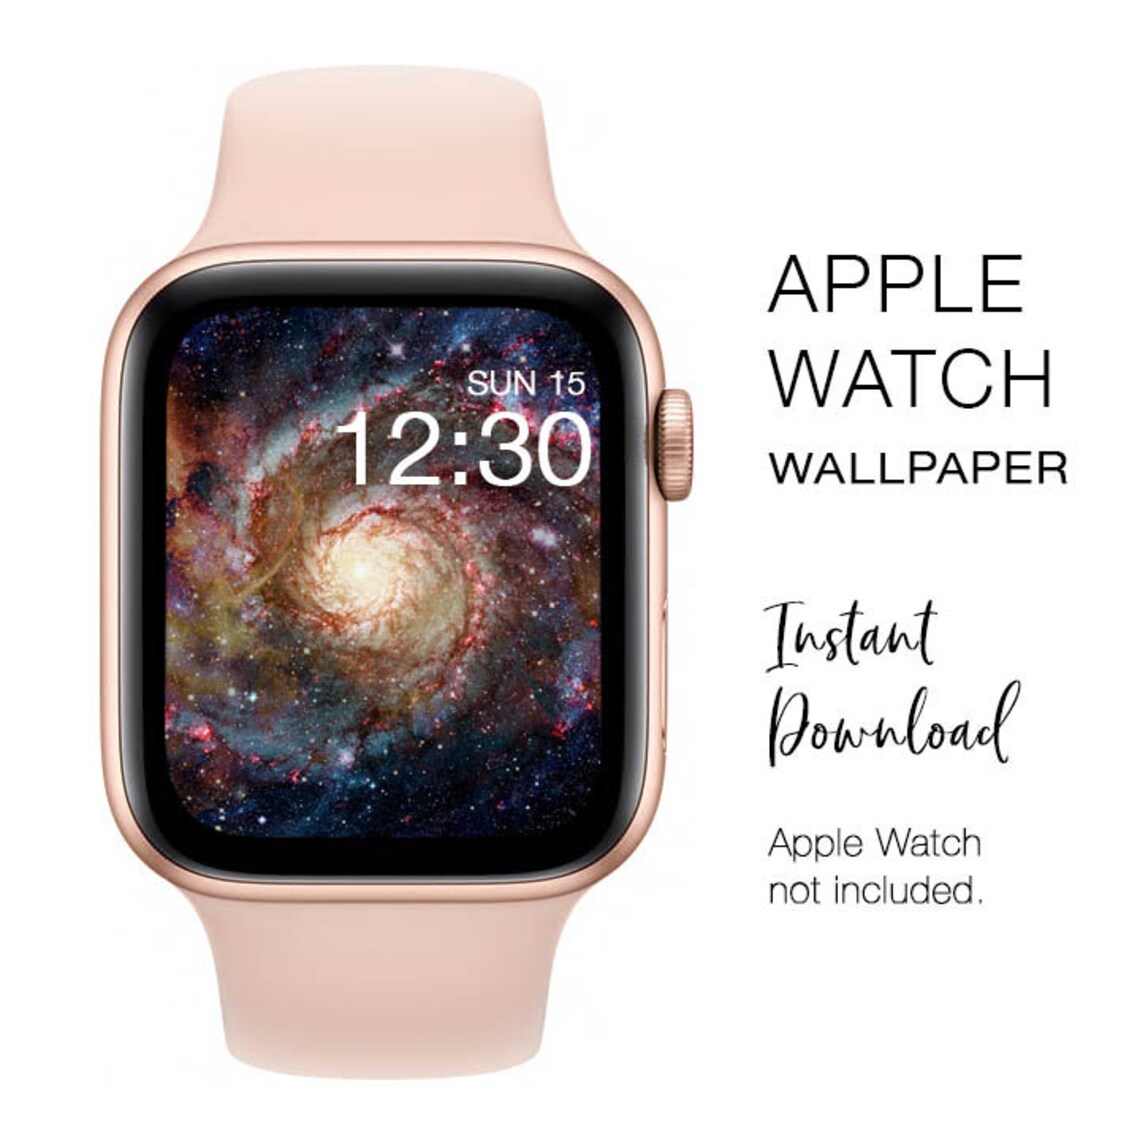 Apple Watch WALLPAPER Galaxy Space Instant Download | Etsy